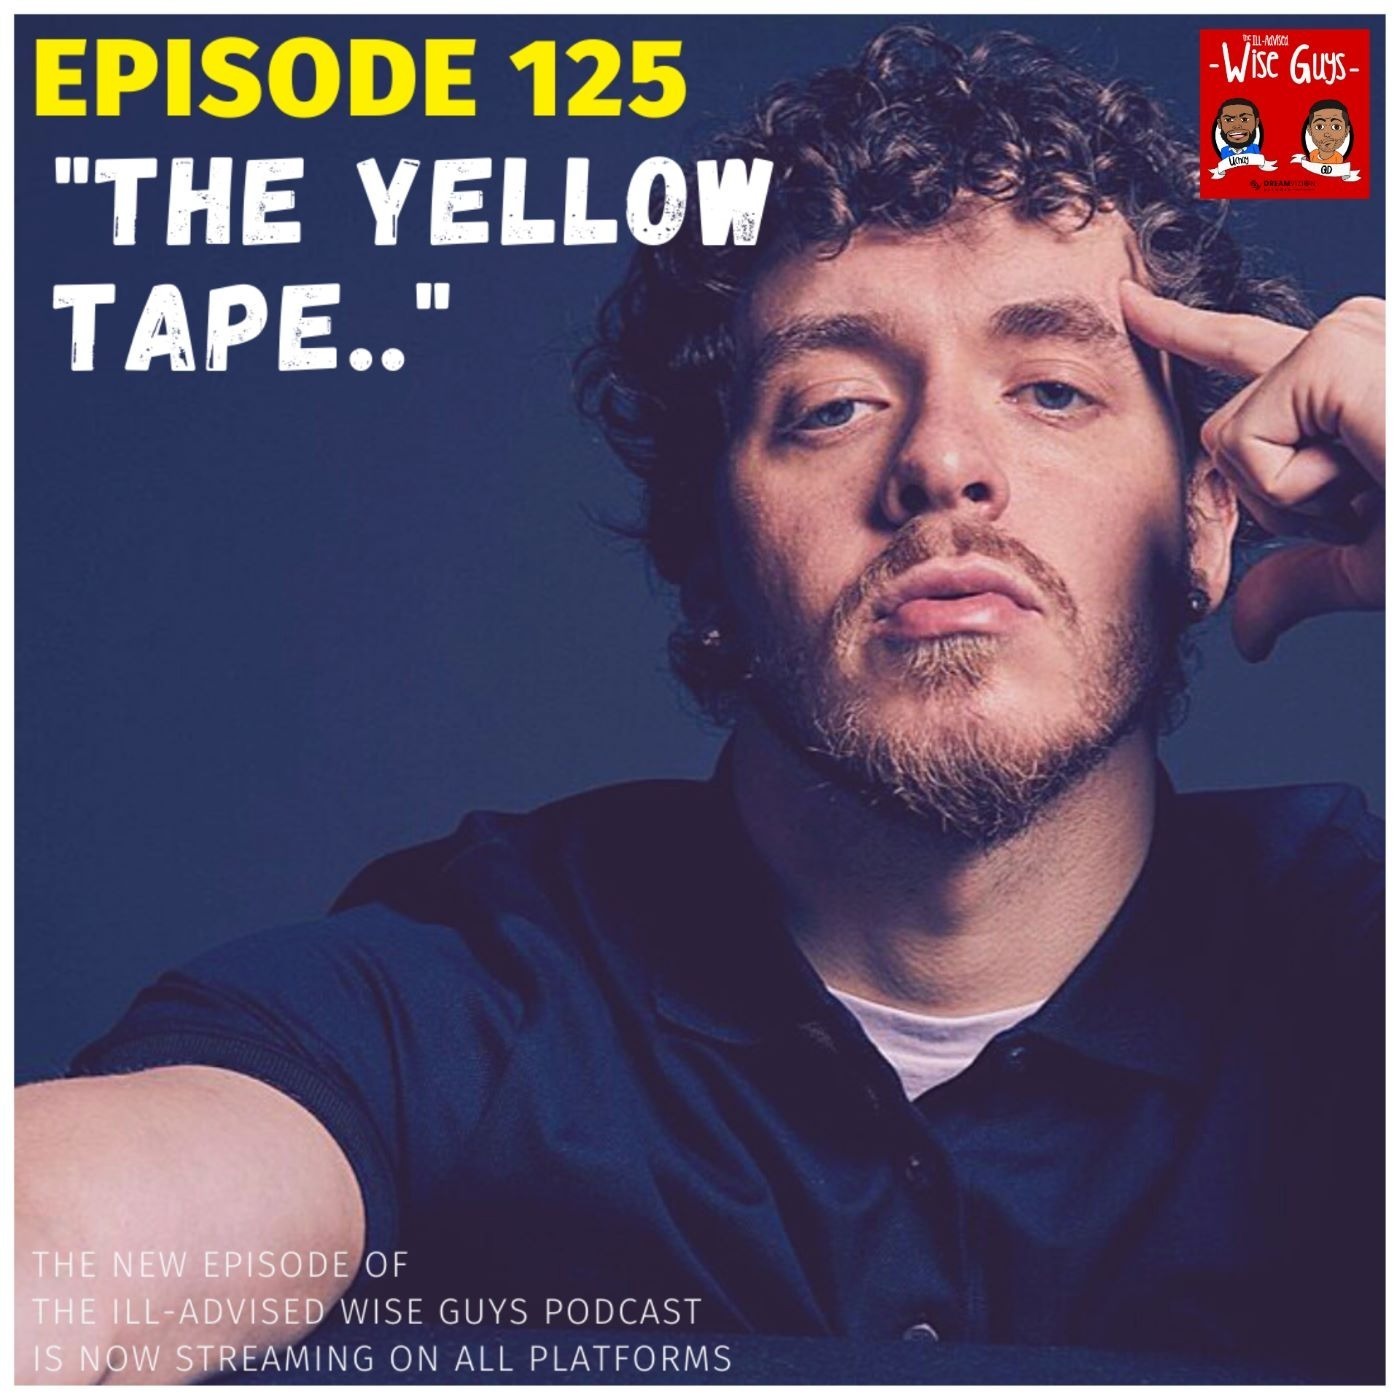 Episode 125 - "The Yellow Tape..." Image